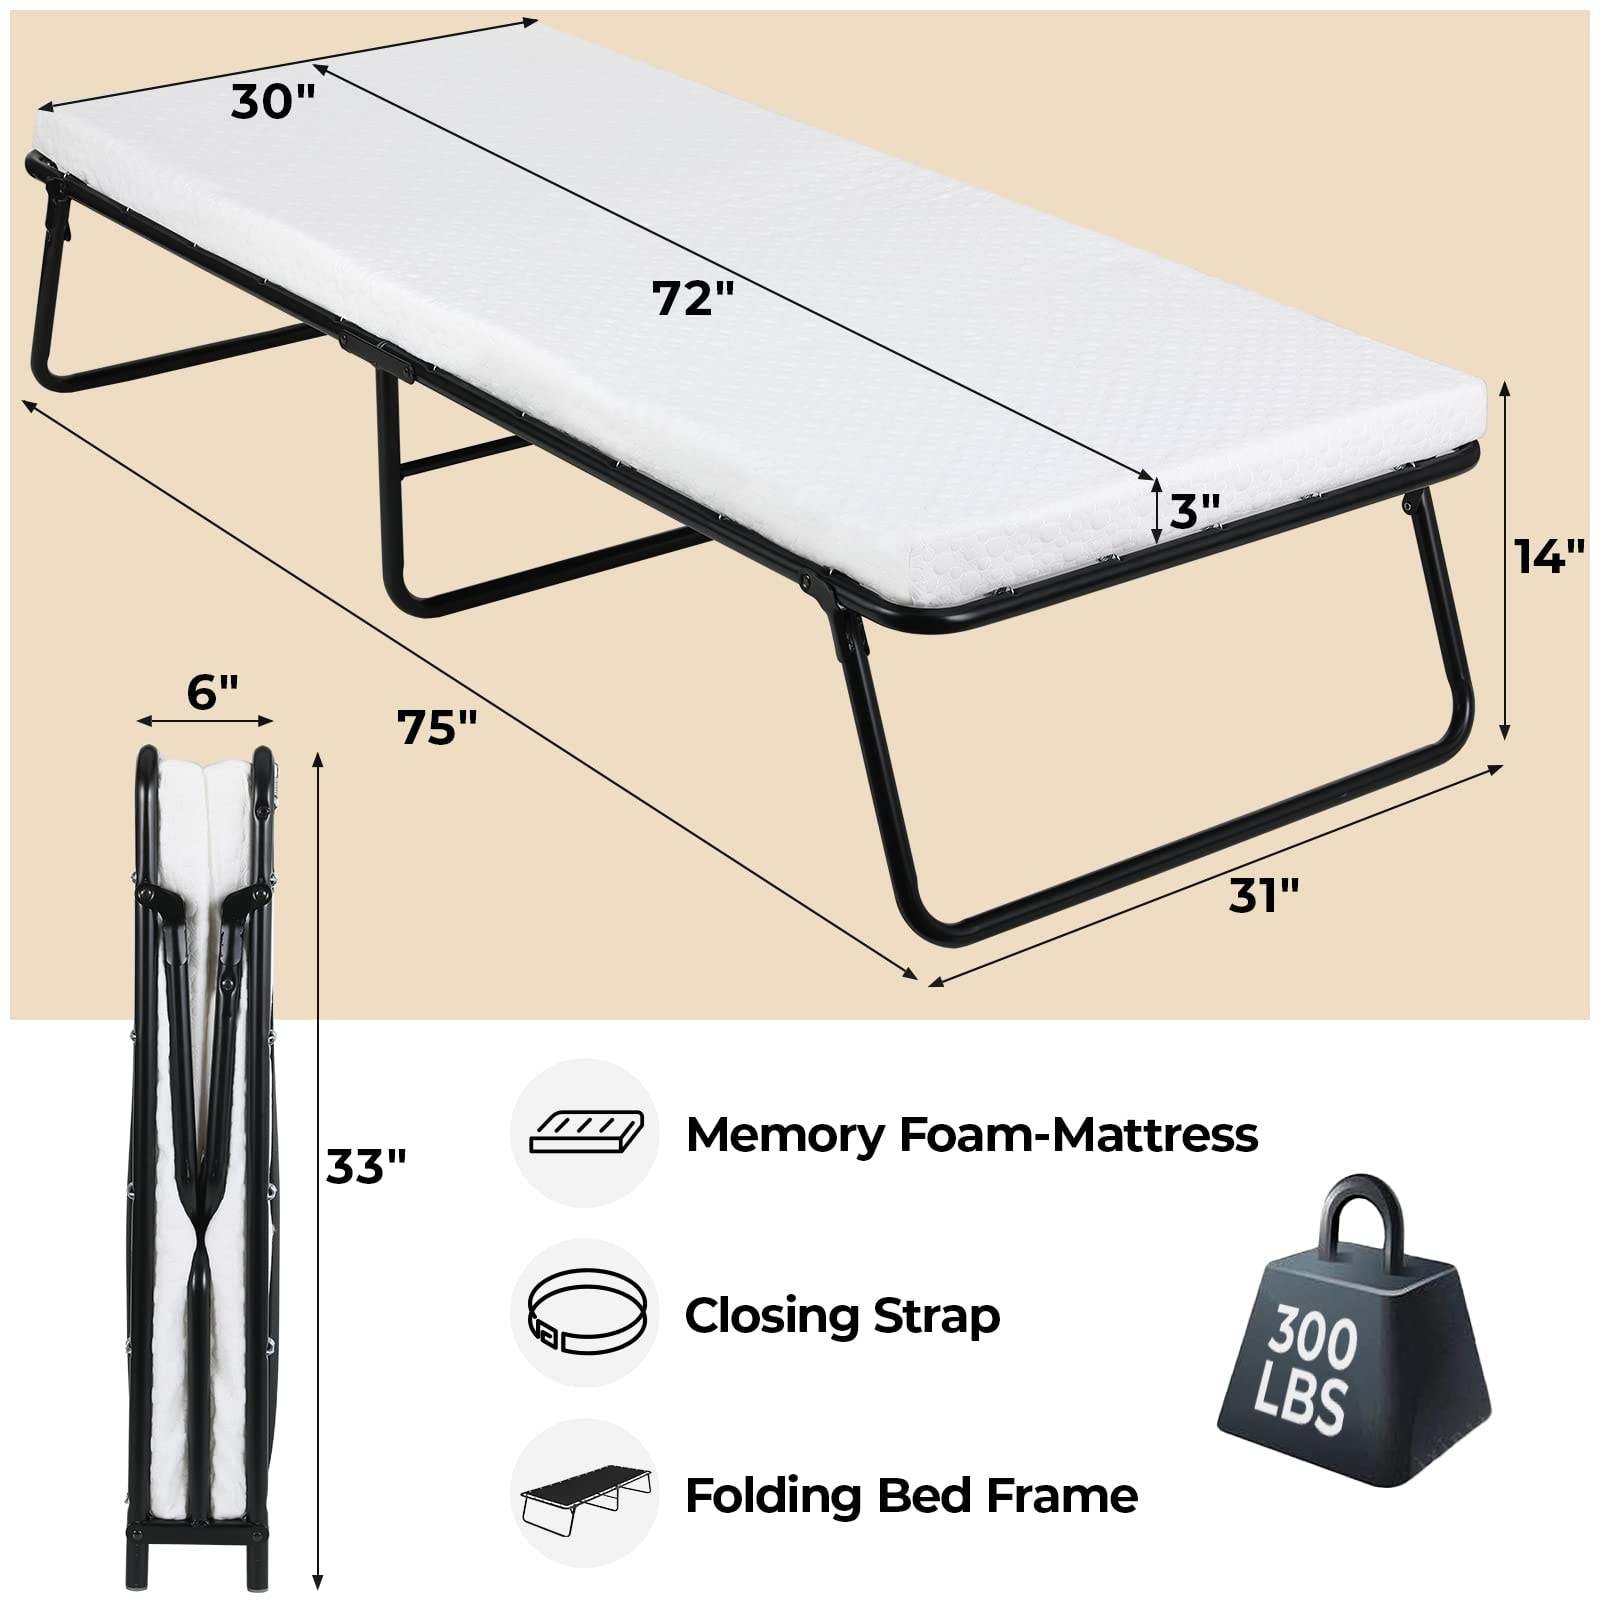 LEISUIT Rollaway Guest Bed Cot Fold Out - Portable 75 x 31 x 14inch